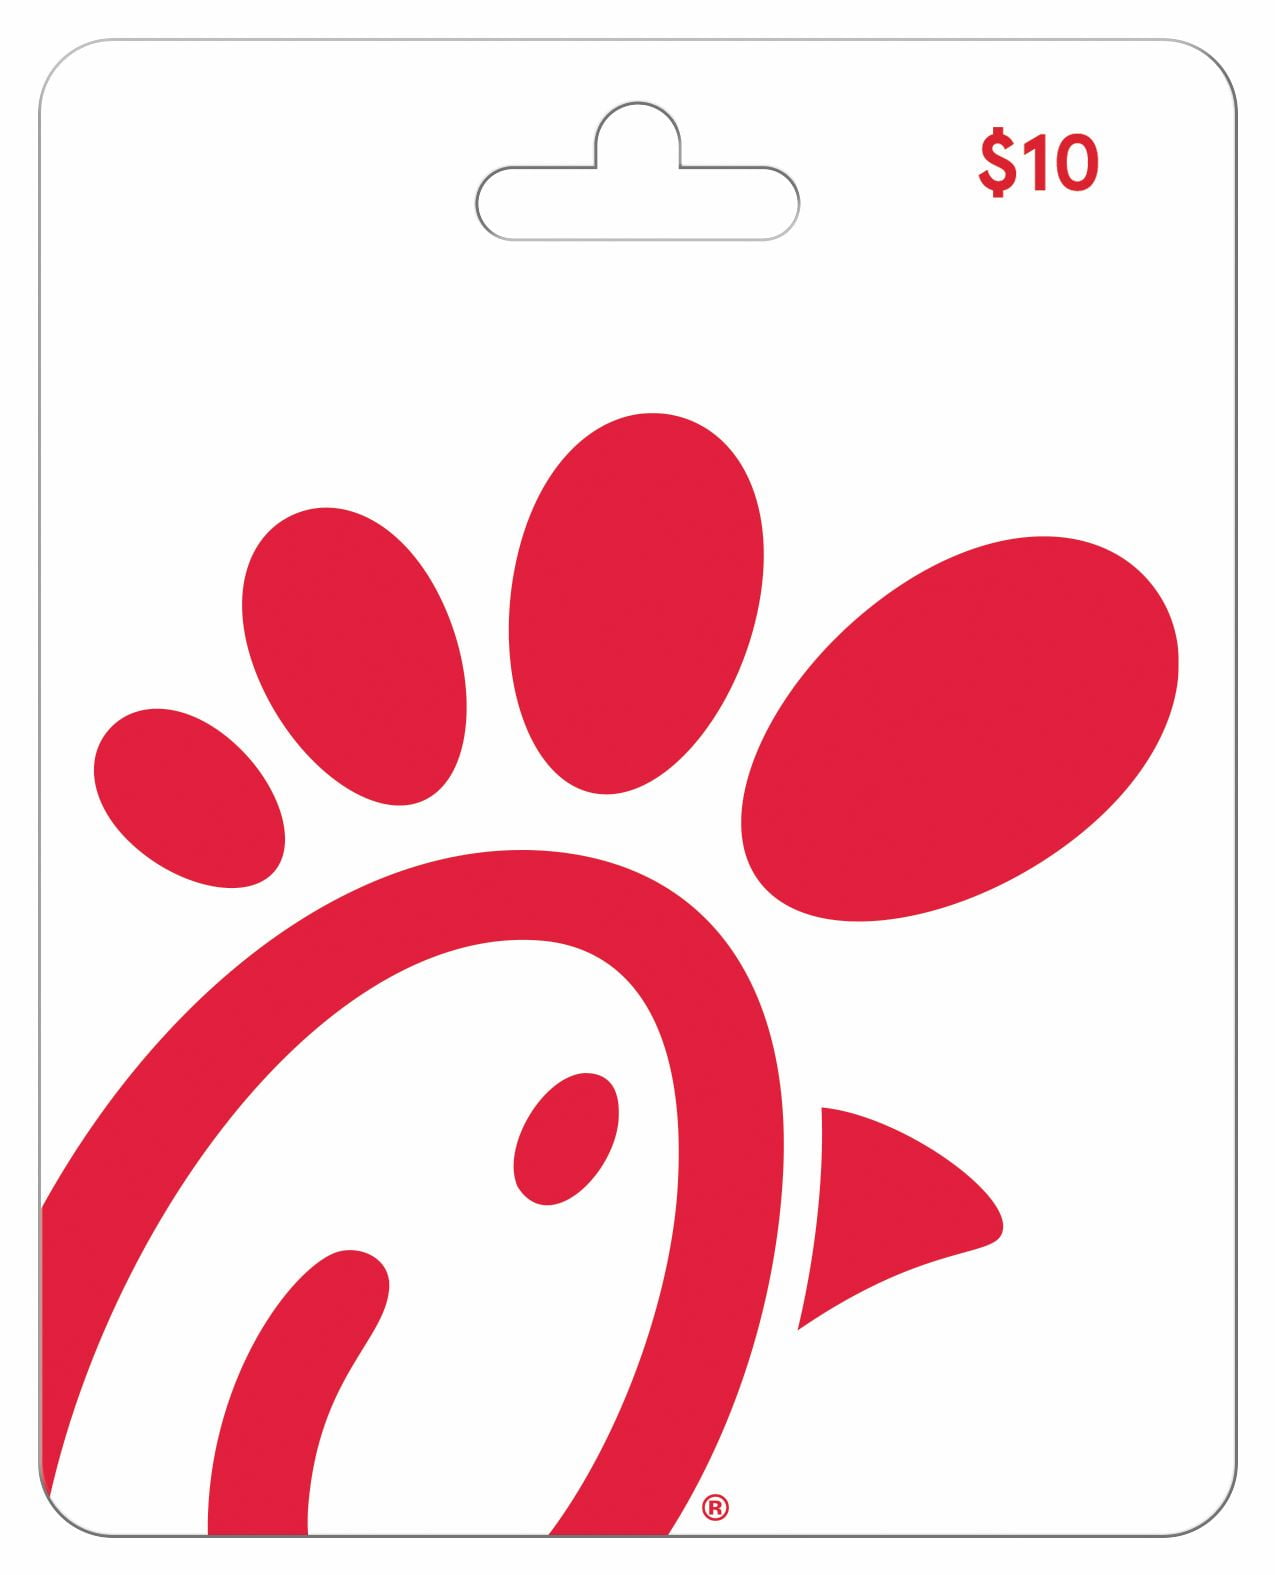 Chick fil a $10 Gift Card